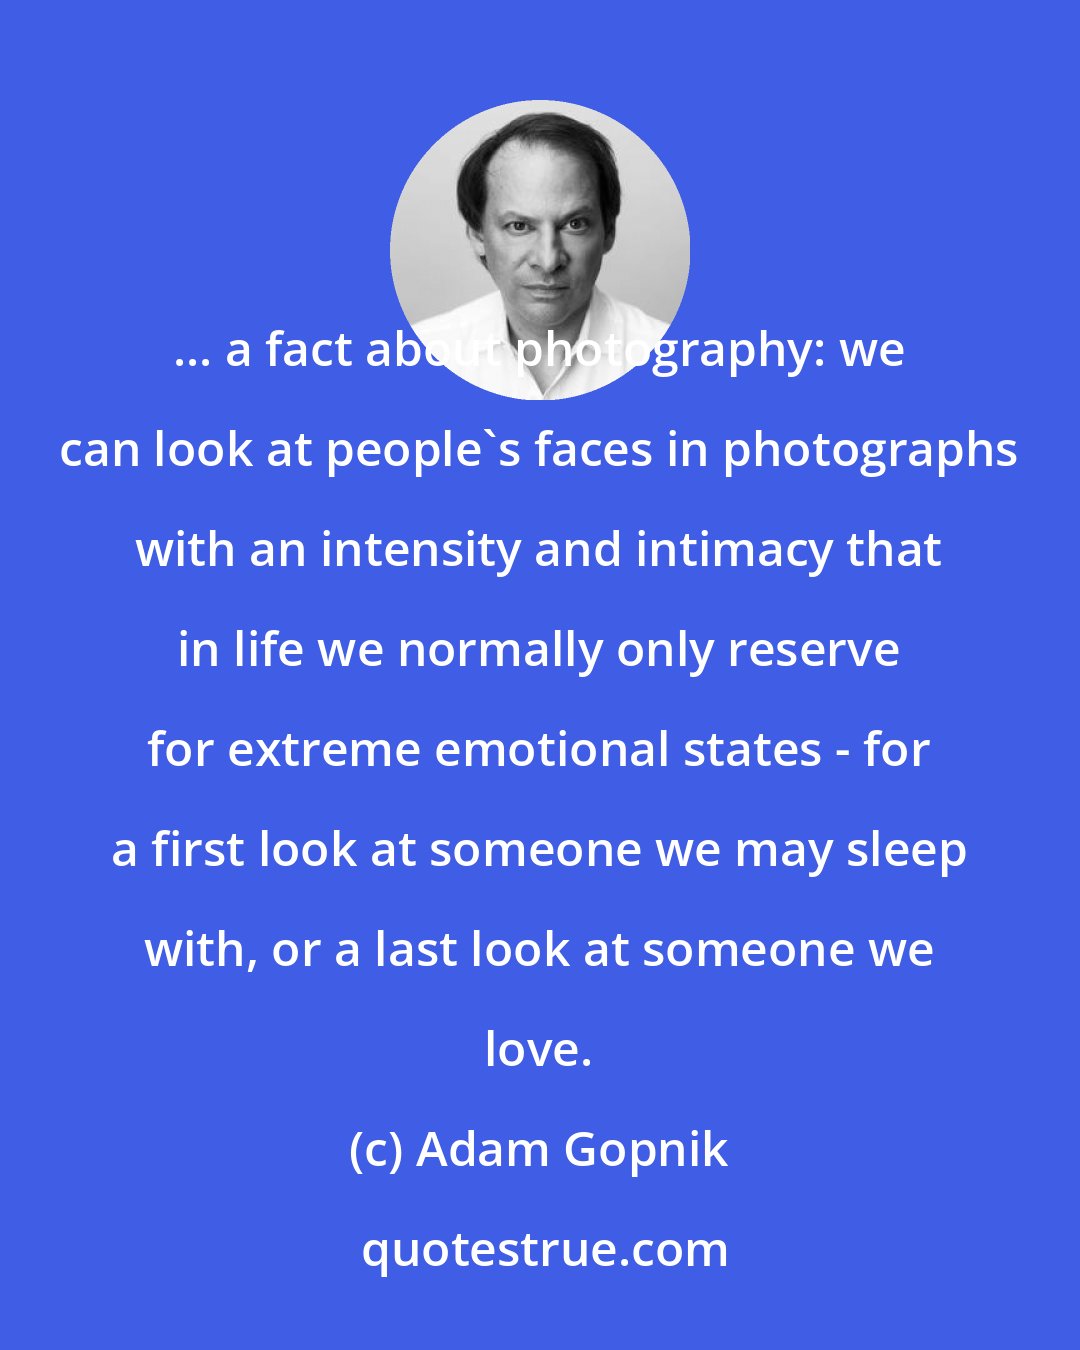 Adam Gopnik: ... a fact about photography: we can look at people's faces in photographs with an intensity and intimacy that in life we normally only reserve for extreme emotional states - for a first look at someone we may sleep with, or a last look at someone we love.